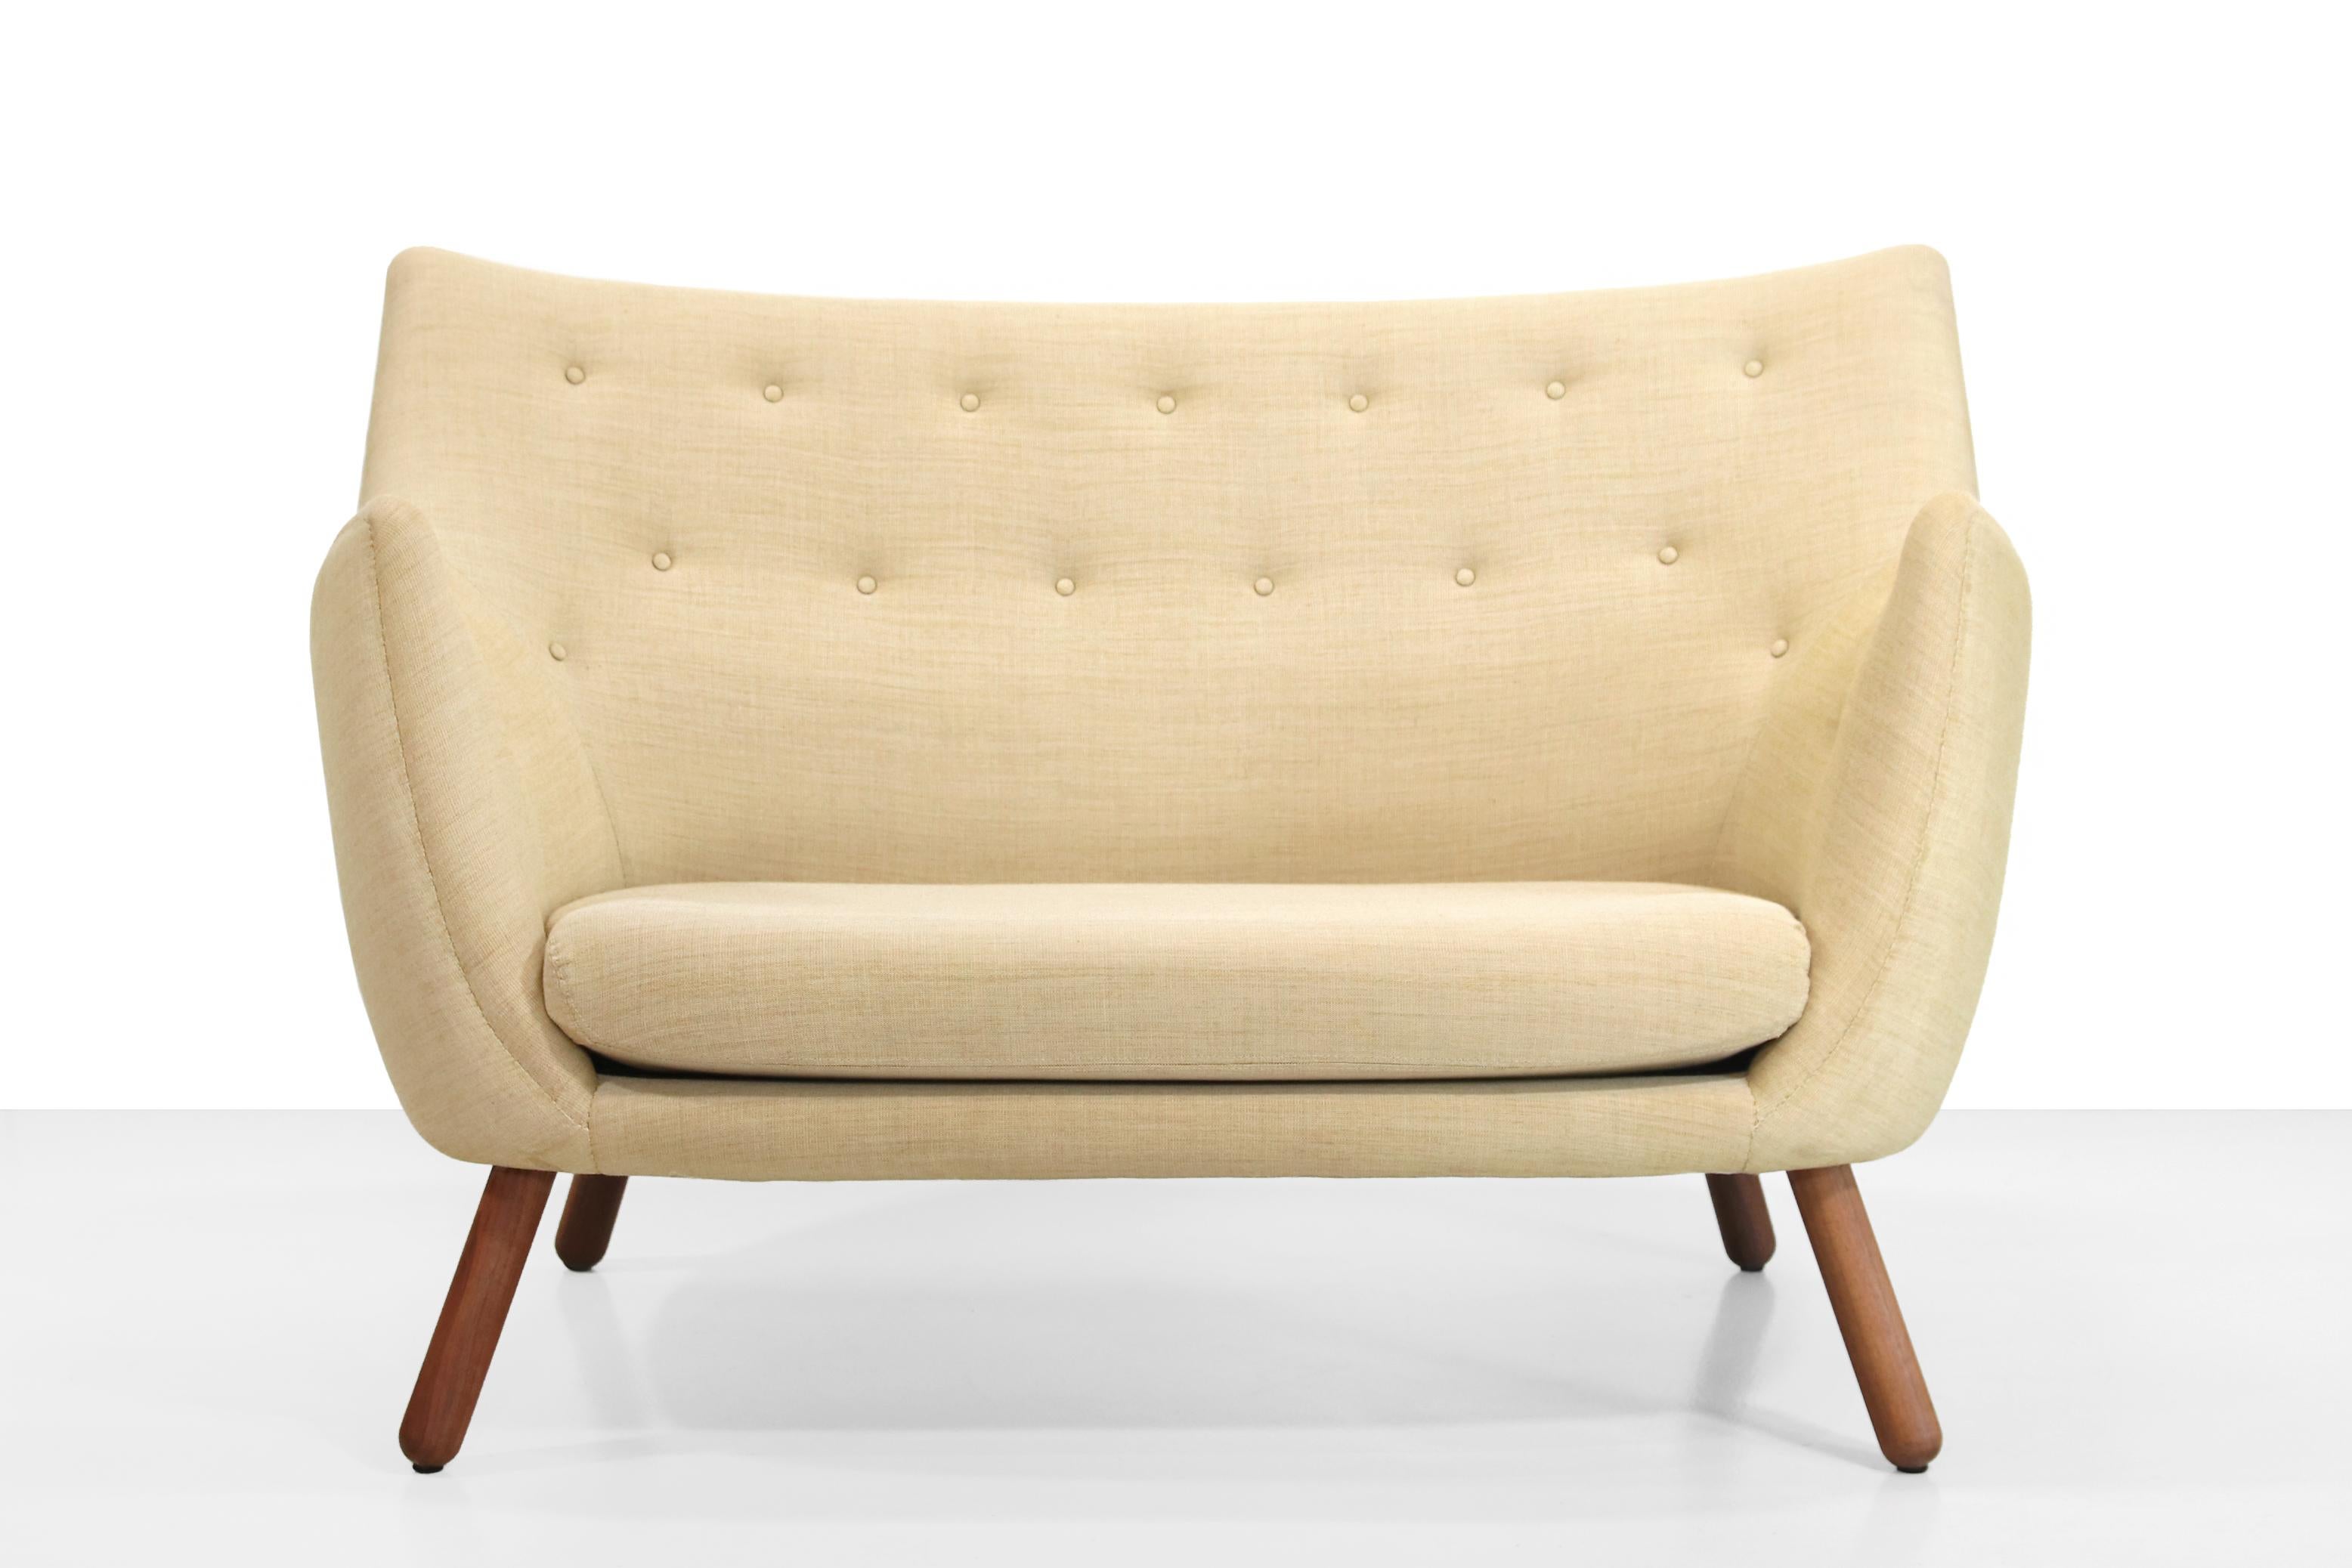 The Poet Sofa first saw the light of day at the Copenhagen Cabinetmakers Guild Exhibition in 1941 and was originally designed for Finn Juhl's own home. Finn Juhl's furniture was very progressive and sculptural for its time. With this sofa you'll